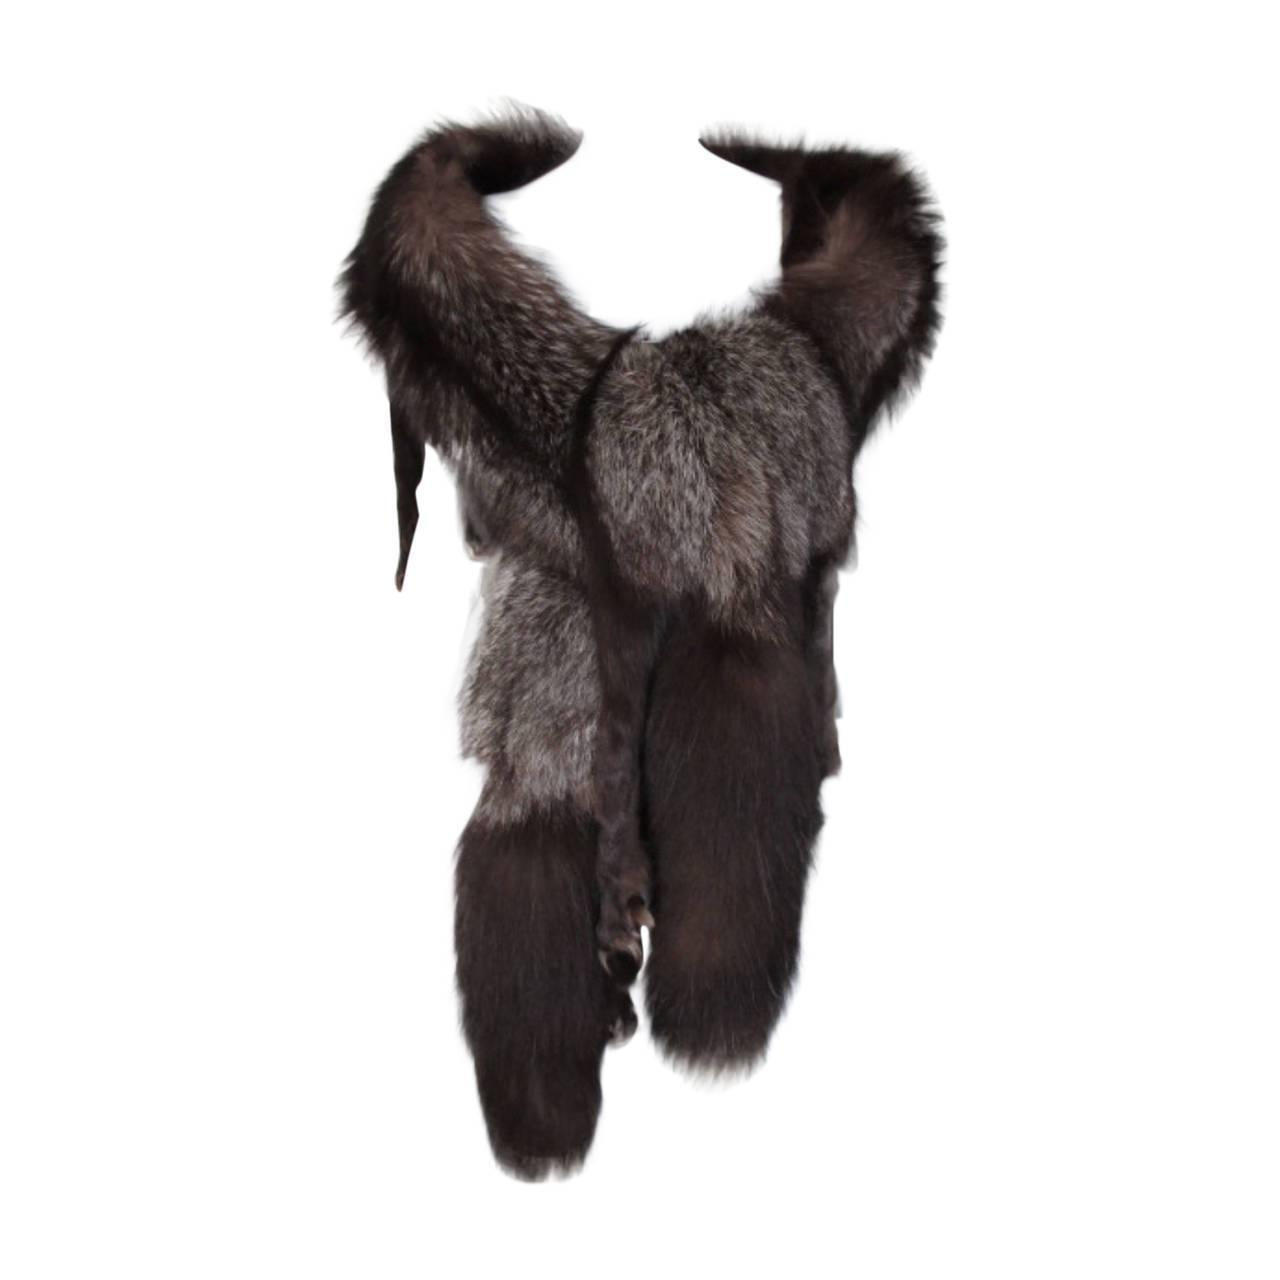 Stunning Silver fox fur stole For Sale at 1stdibs